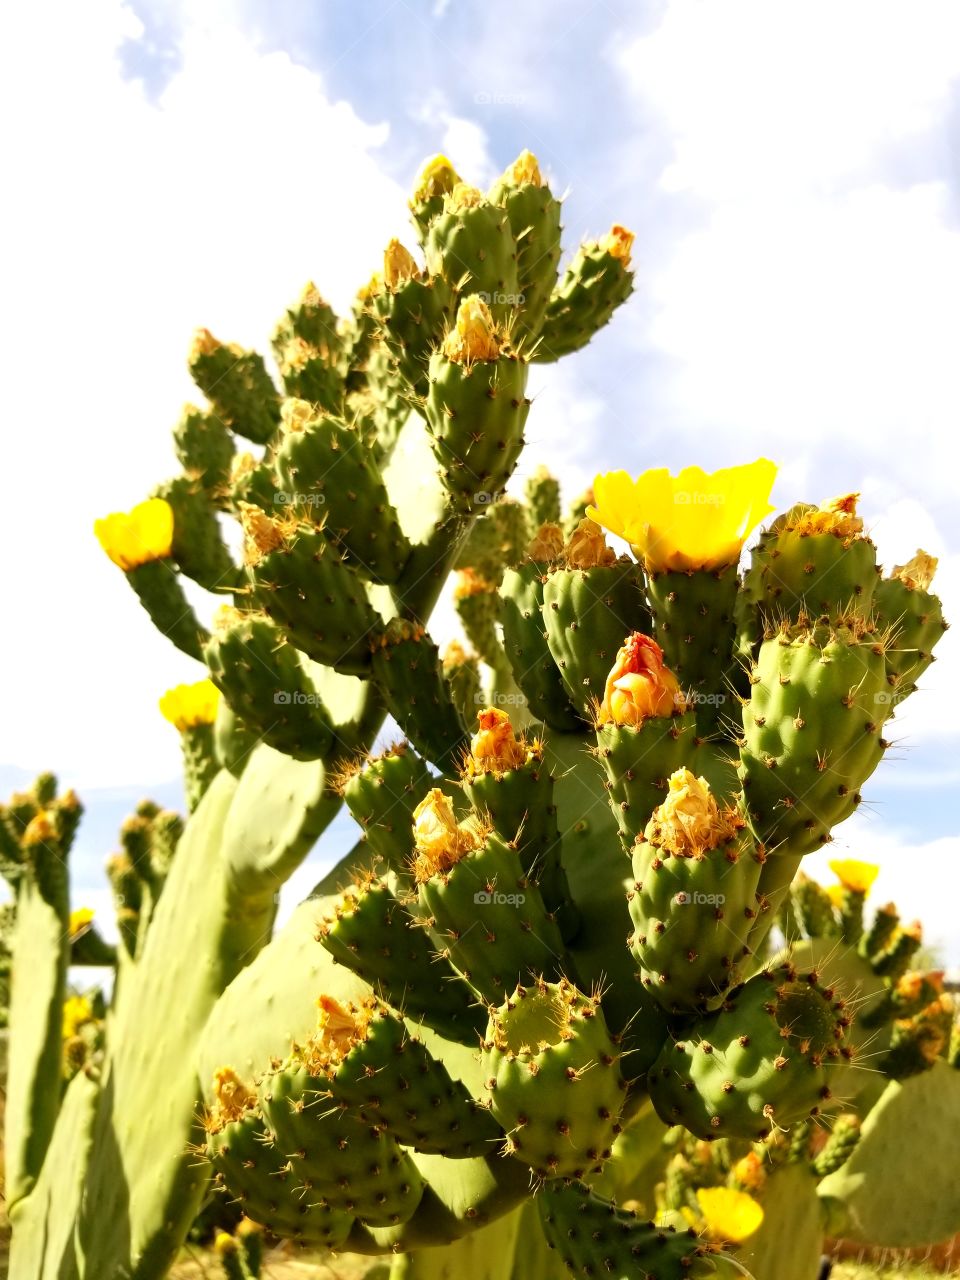 Tuna cactus flowers, lots of delicious fruits.